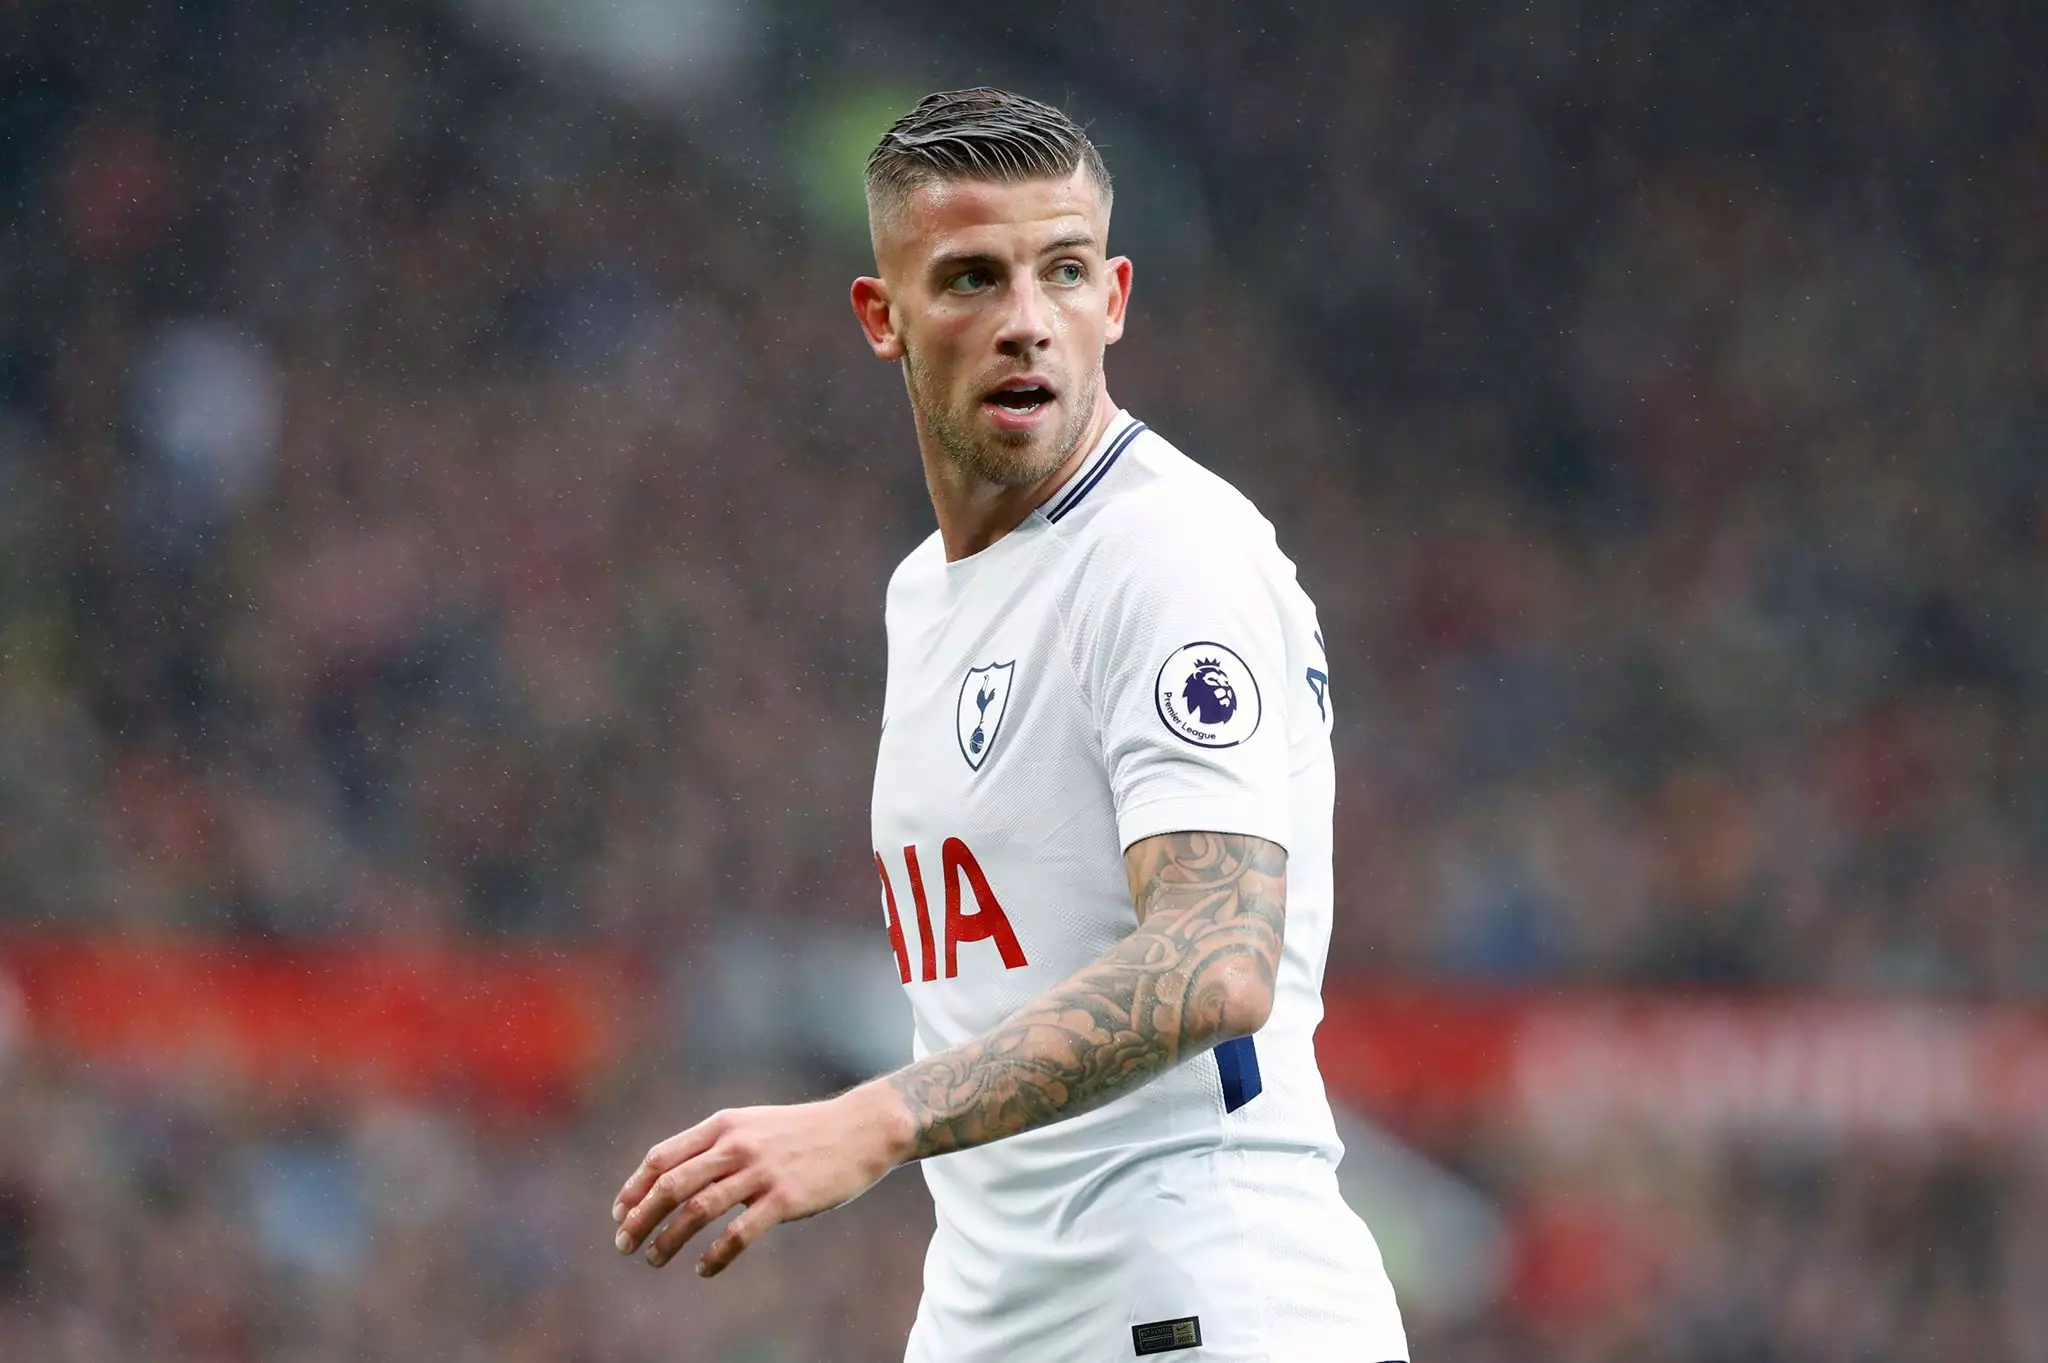 Alderweireld would be one of the most popular targets if he became available. Image: PA Images